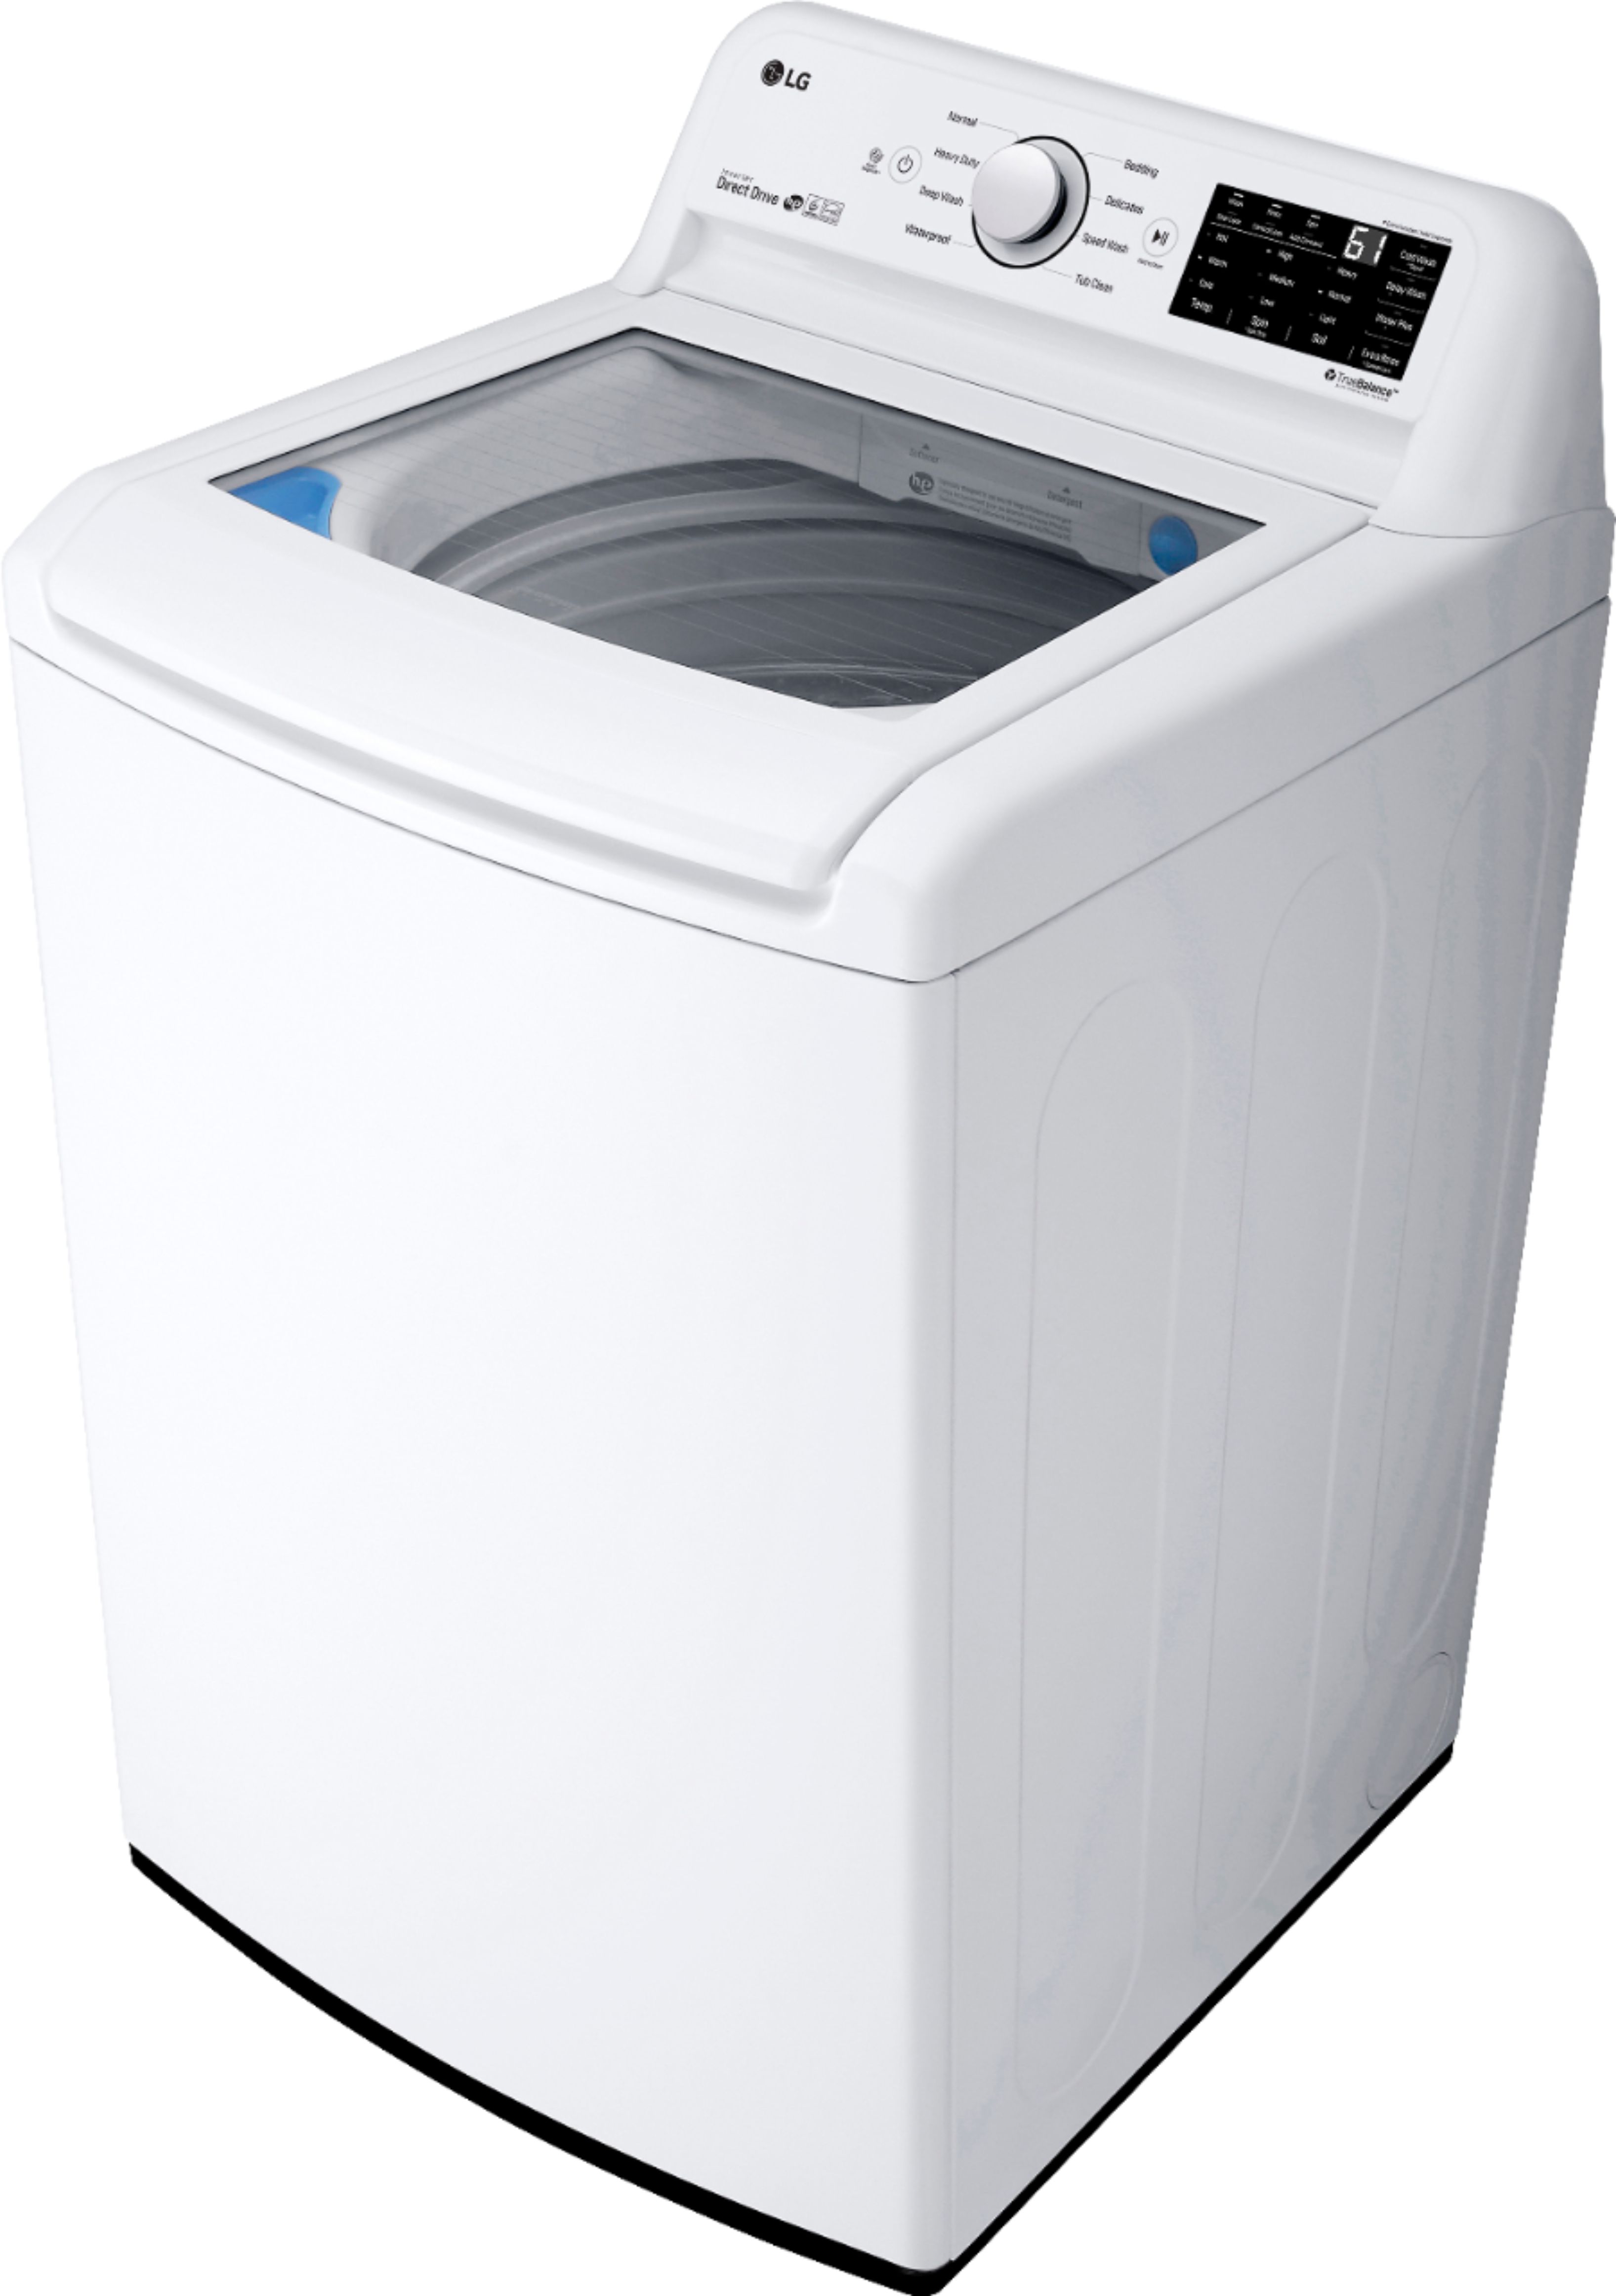 Questions and Answers LG 4.5 Cu. Ft. HighEfficiency TopLoad Washer